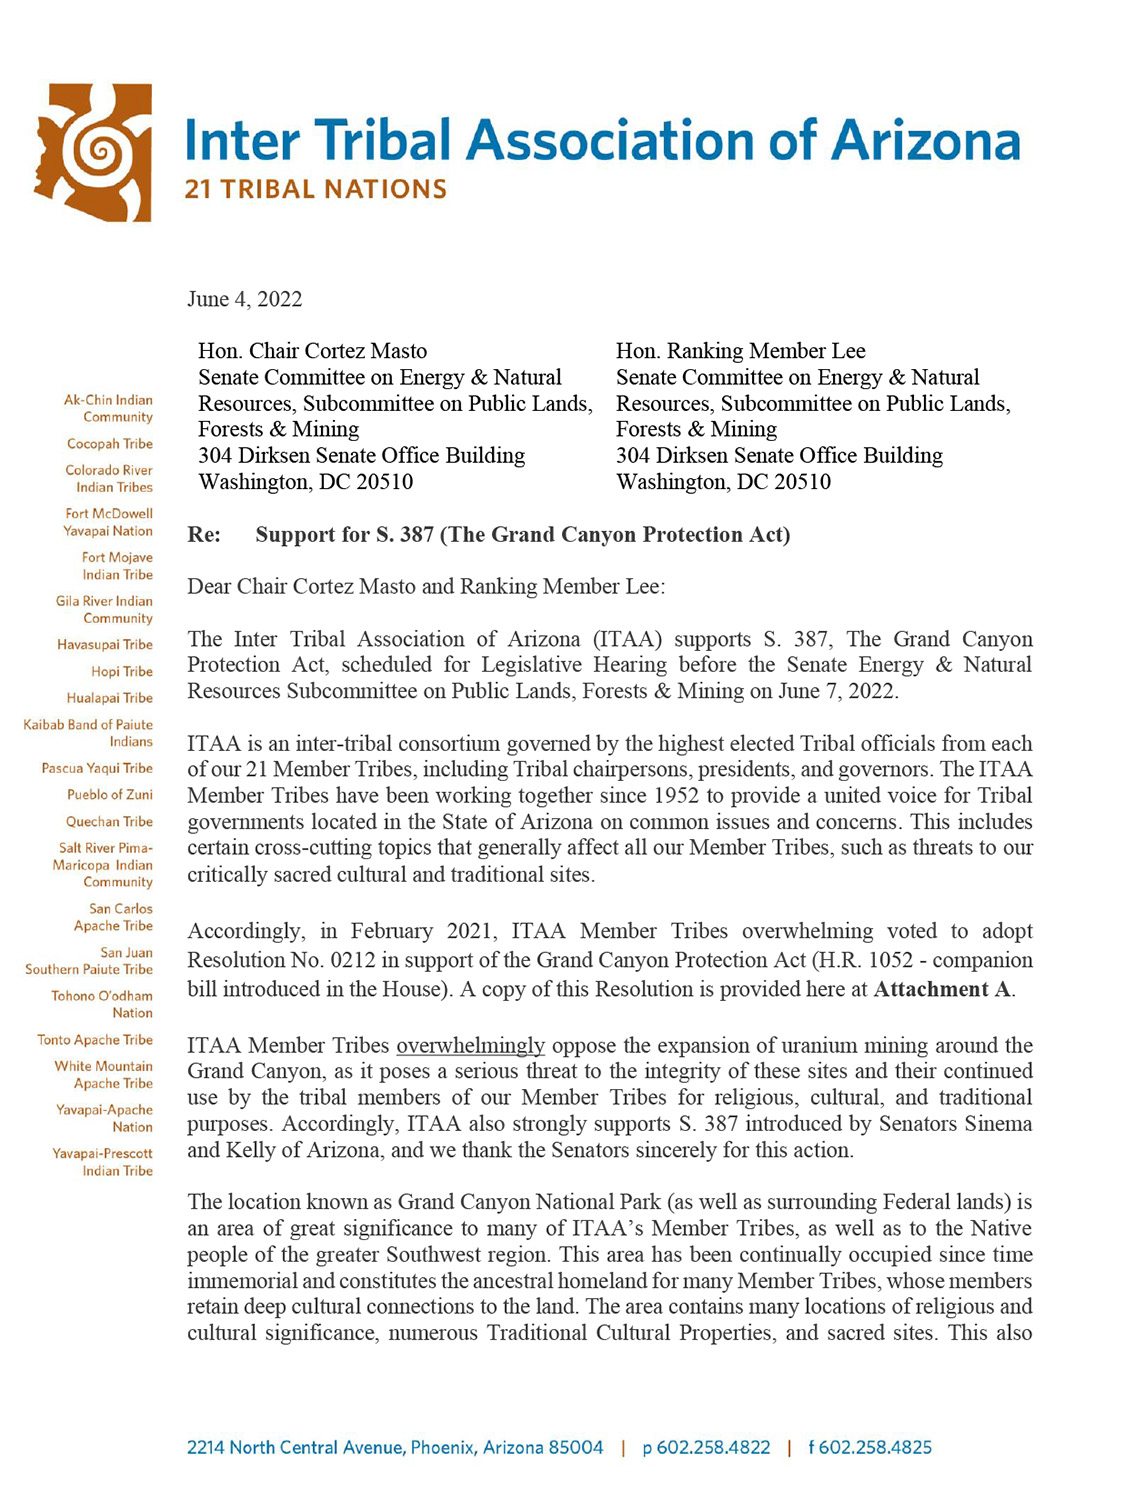 Inter Tribal Association of Arizona support for The Grand Canyon Protection Act